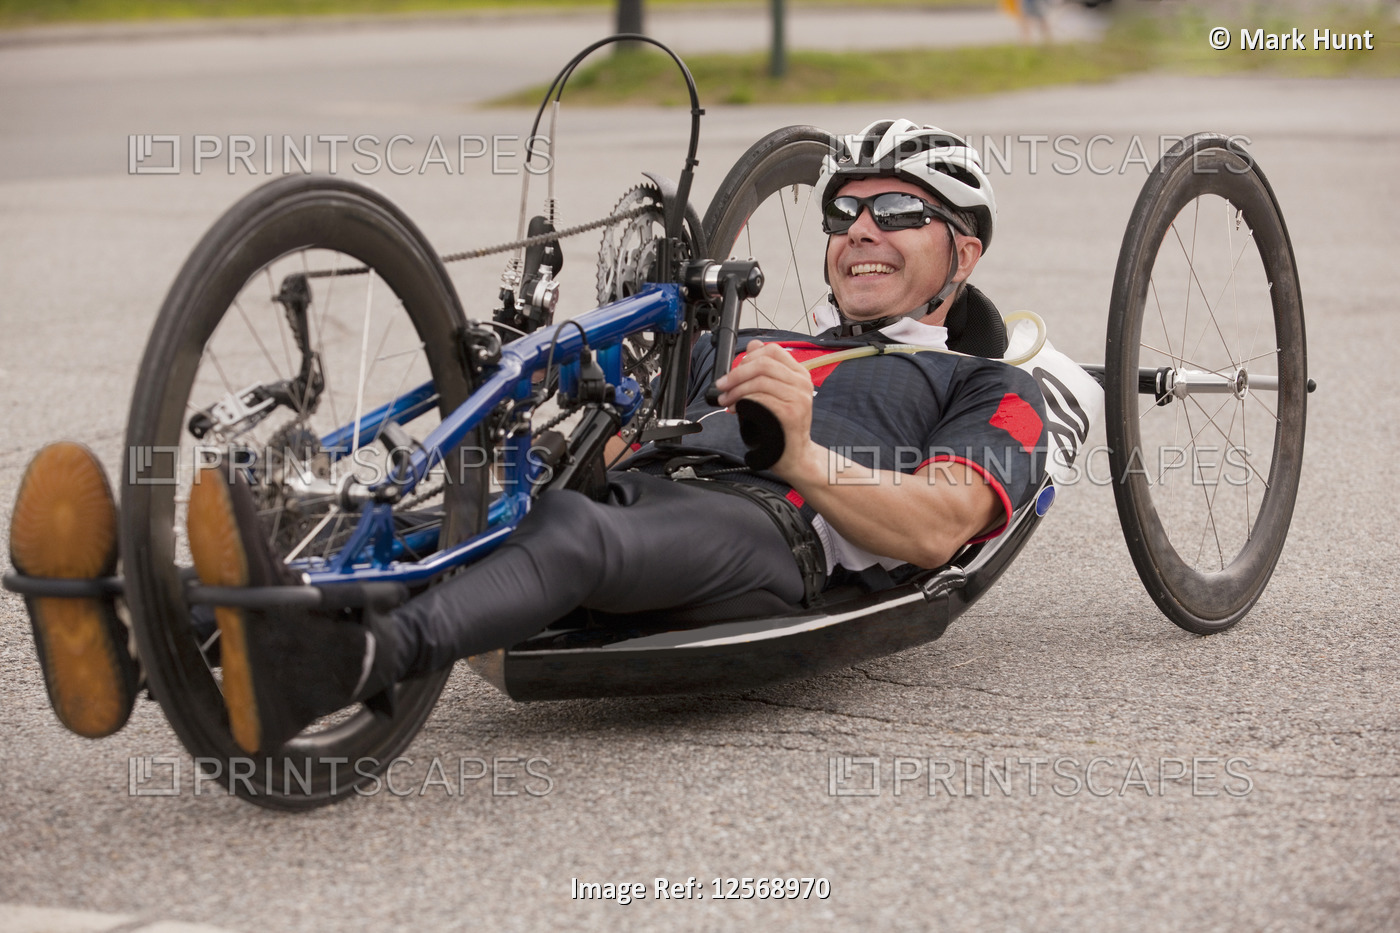 Man with spinal cord injury participating in a handcycle race